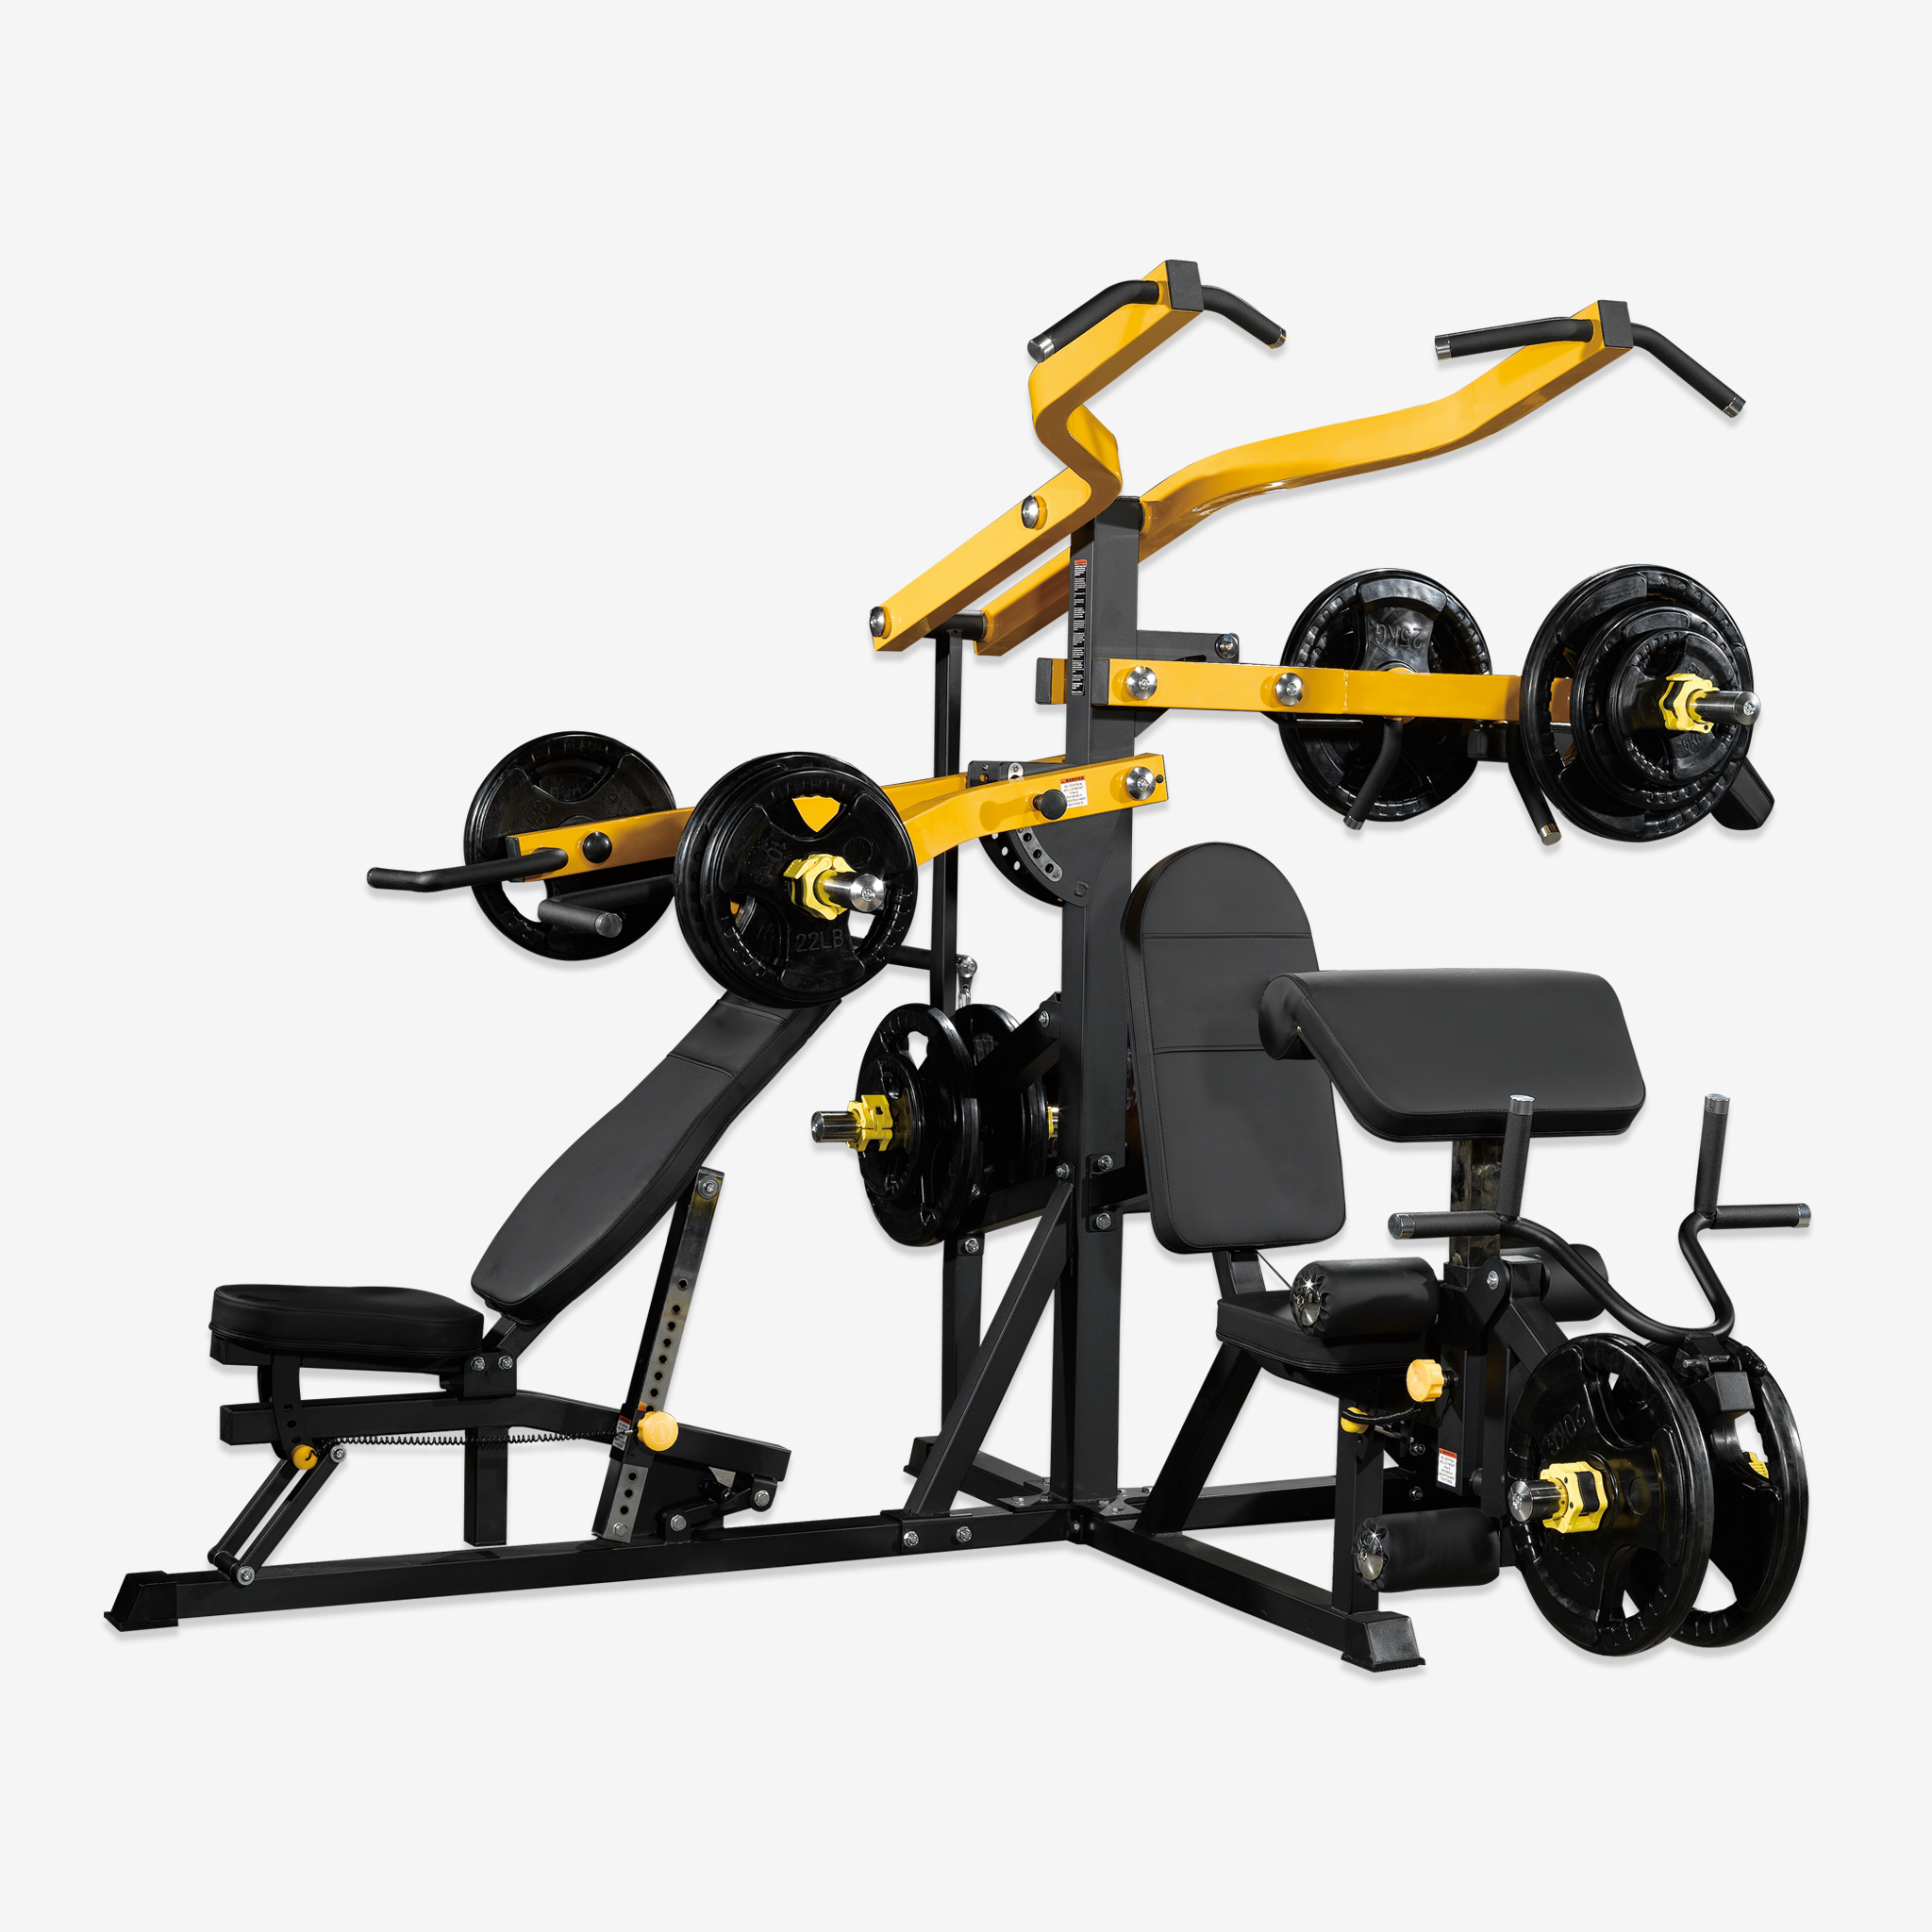 Light-commercial Equipment Three Person Function Trainer AL-167